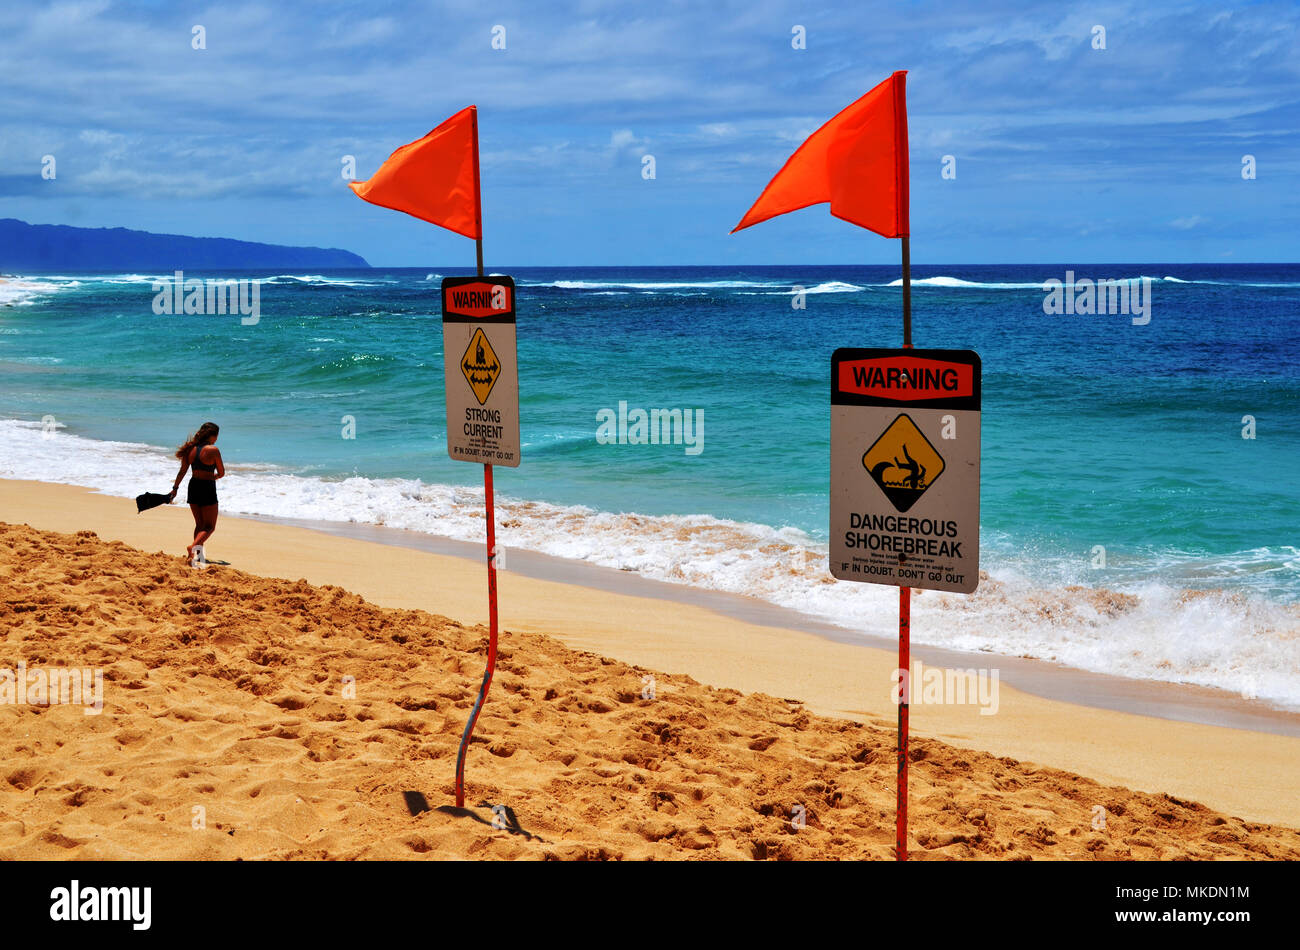 Warning sign on the beach Stock Photo